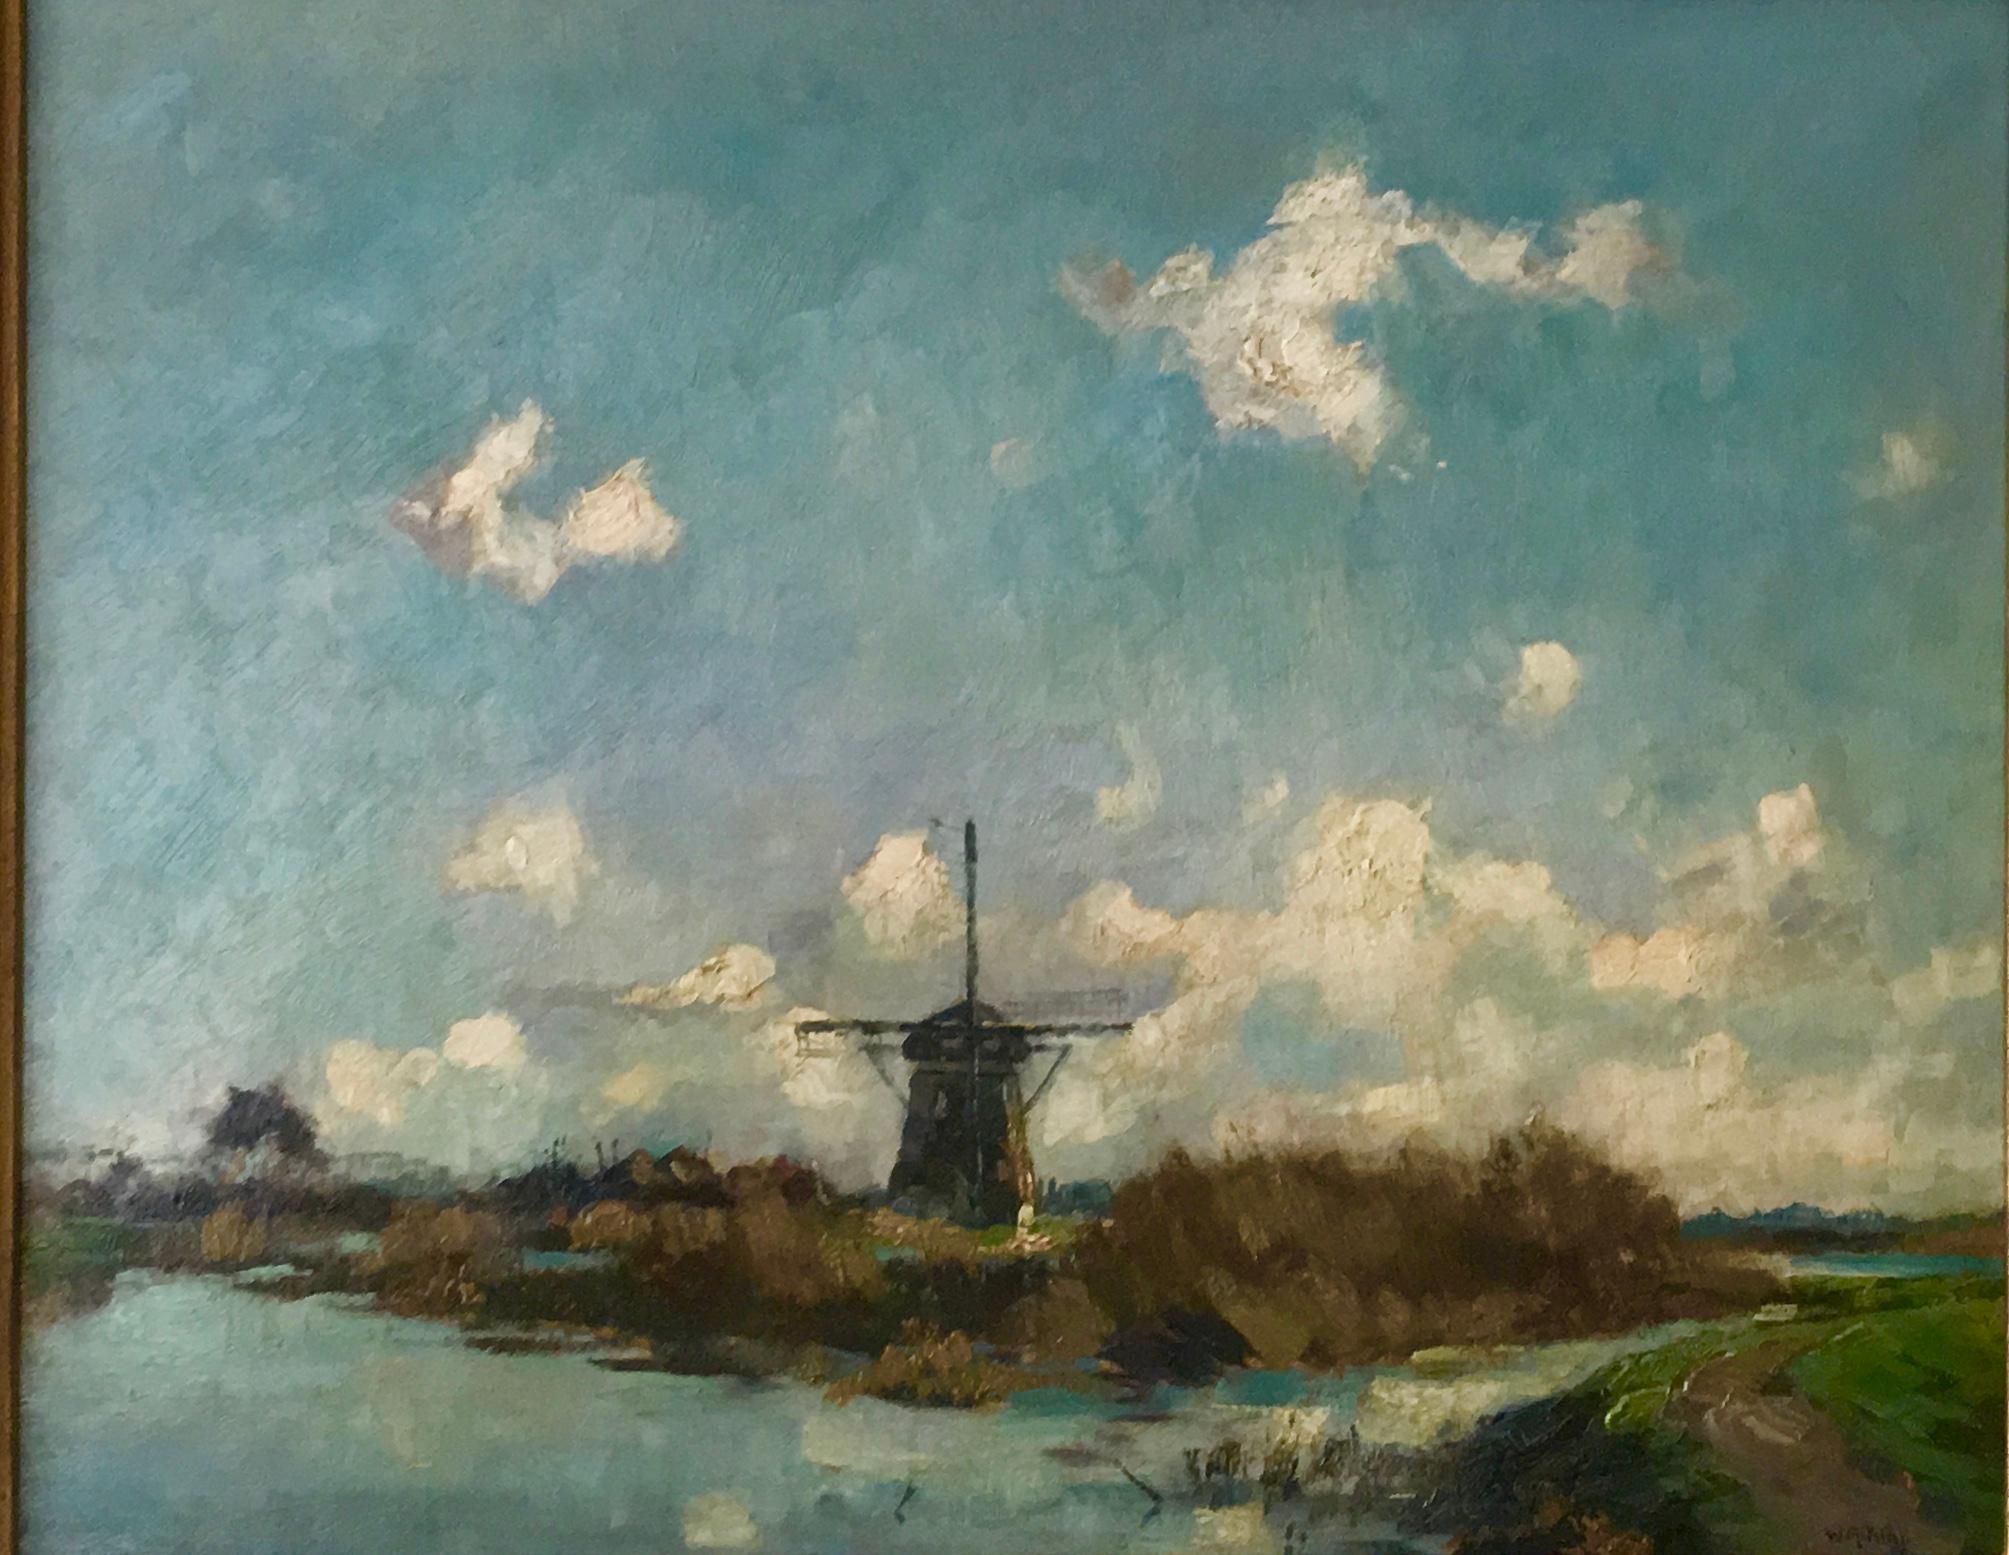 Willem Alexander Knip is considered to be one of the most important painters of 